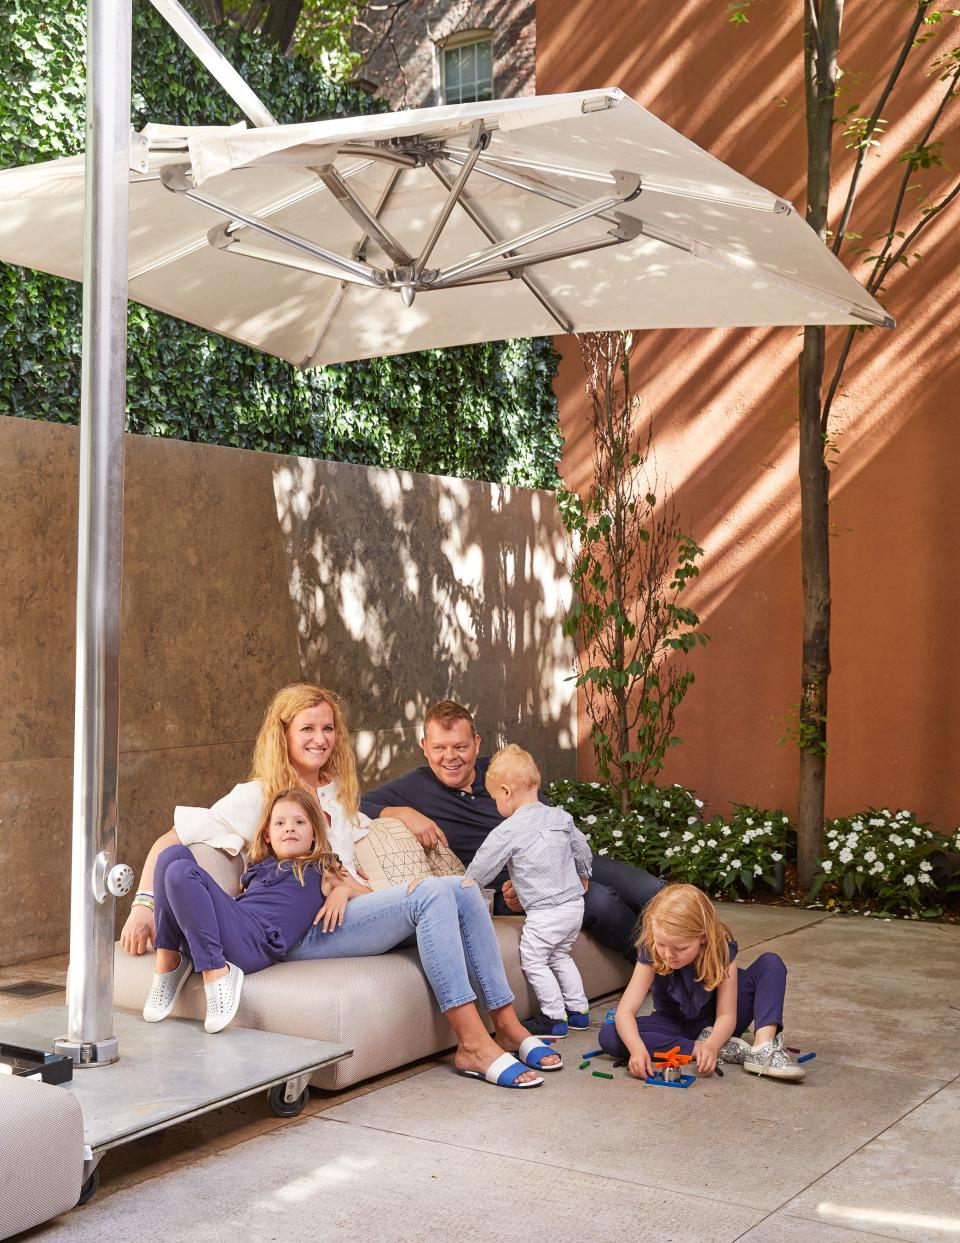 Verhoeven and Reijtenbagh with their children in the backyard, where the kids ride their bikes and play for hours at a time. “We spend most of our time there; it becomes an extension of the living room when we open the big sliding doors all the way,” says the CEO.